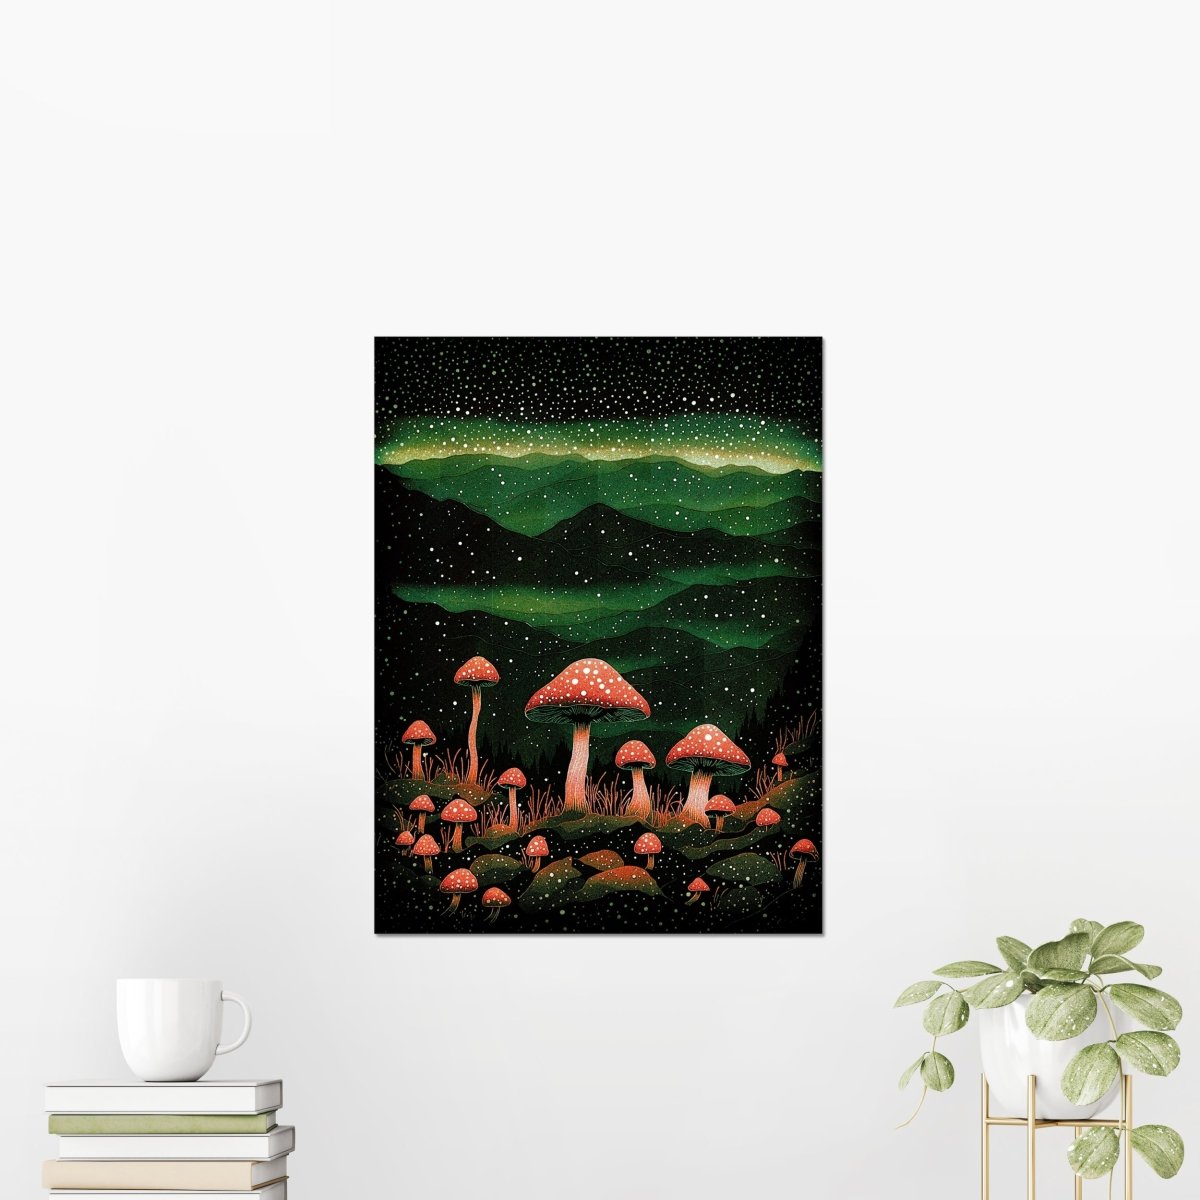 Woodlands mycology - Art print - Poster - Ever colorful